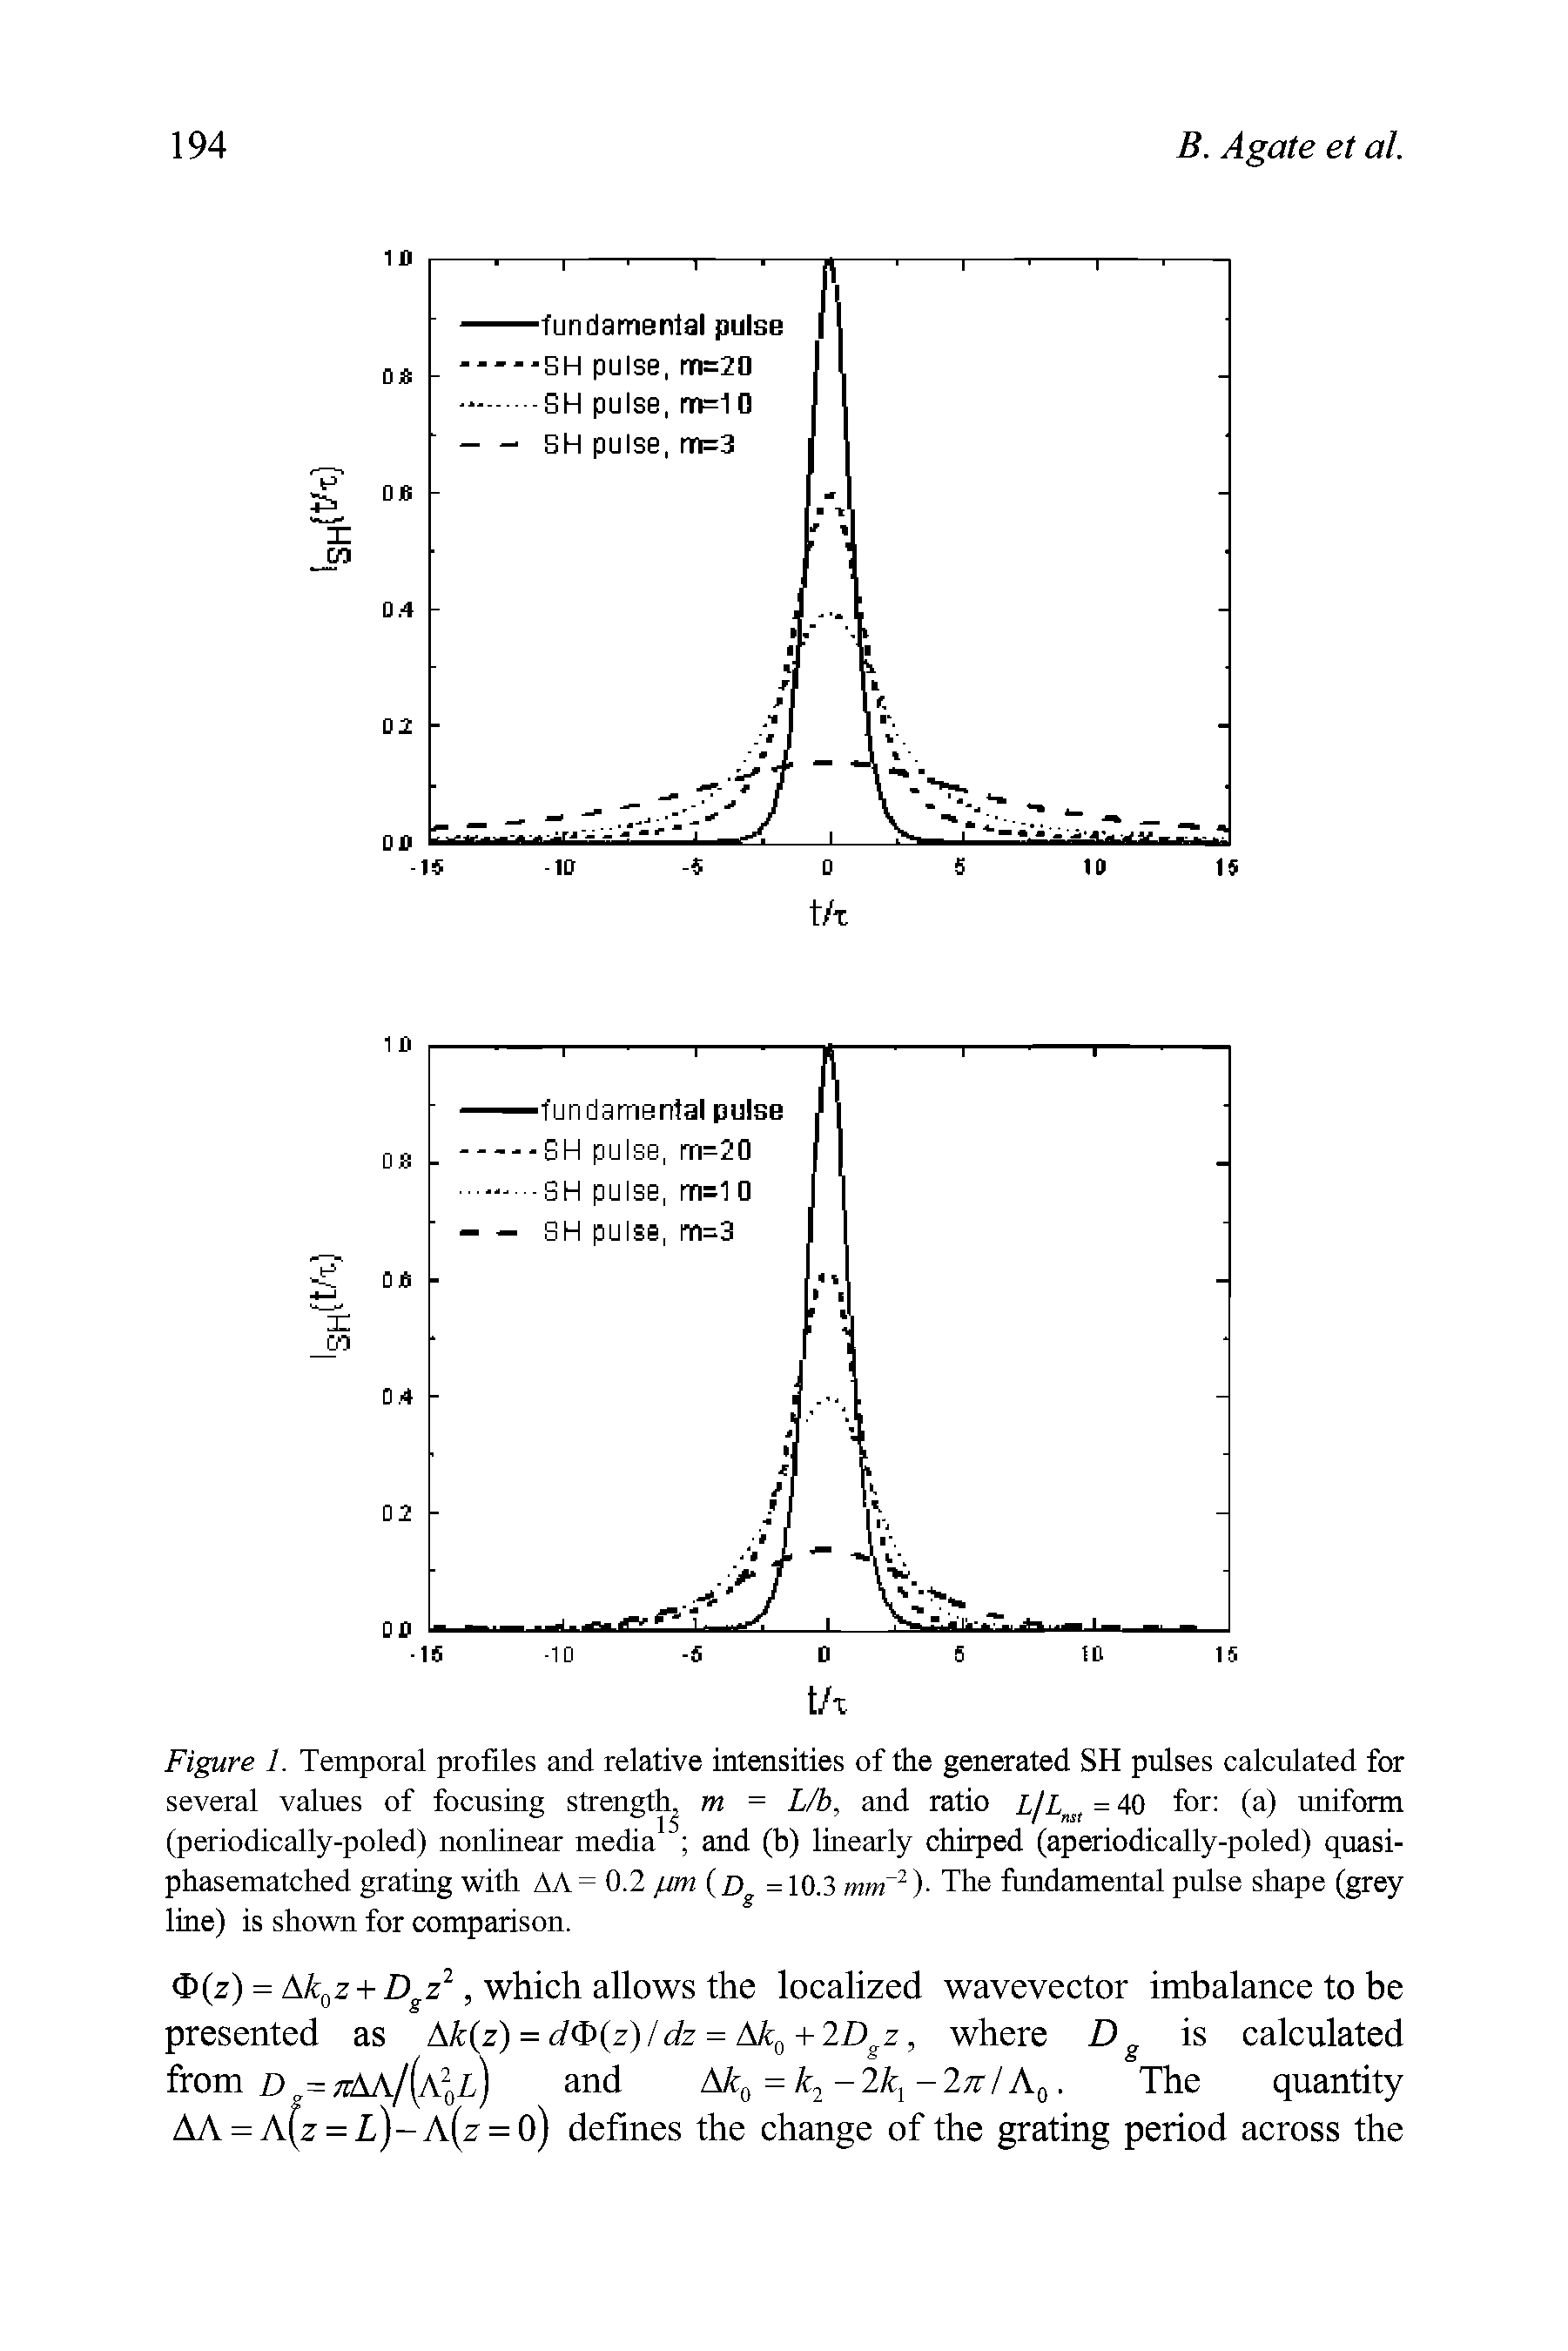 Figure 1. Temporal profiles and relative intensities of the generated SH pulses calculated for several values of focusing strength m = L/b, and ratio LjL, = 40 for (a) uniform (periodically-poled) nonlinear media and (b) linearly chirped (aperiodically-poled) quasi-phasematched grating with AA = 0.2 /um (d = 10.3 ) The fundamental pulse shape (grey...